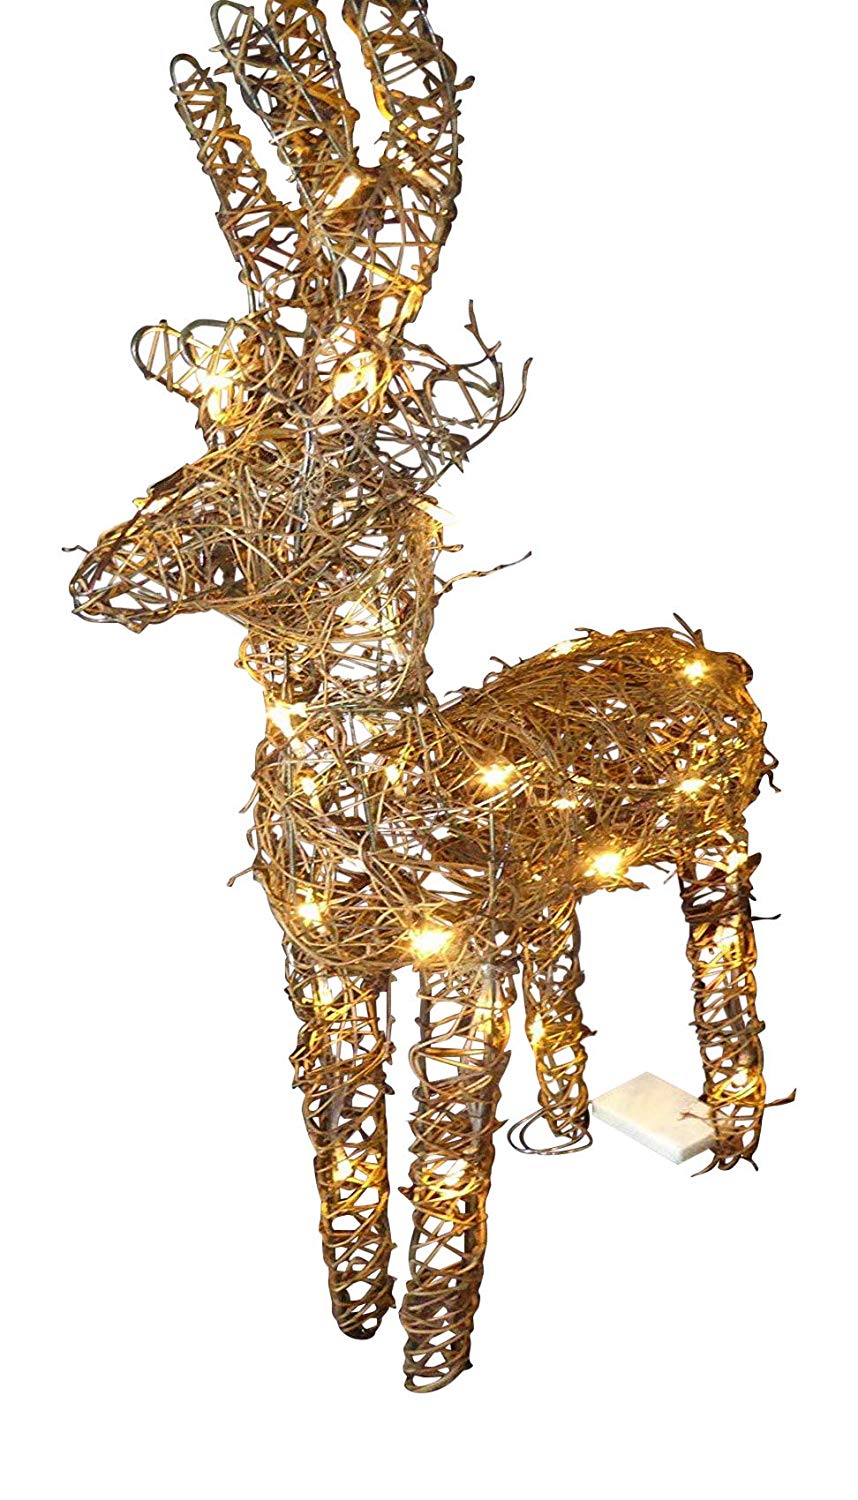 Large Light Up 90cm 3ft Pre Lit Rustic Brown Reindeer Figure Ornament Warm White Led Lights Battery Operated Indoor Outdoor Christmas Decoration